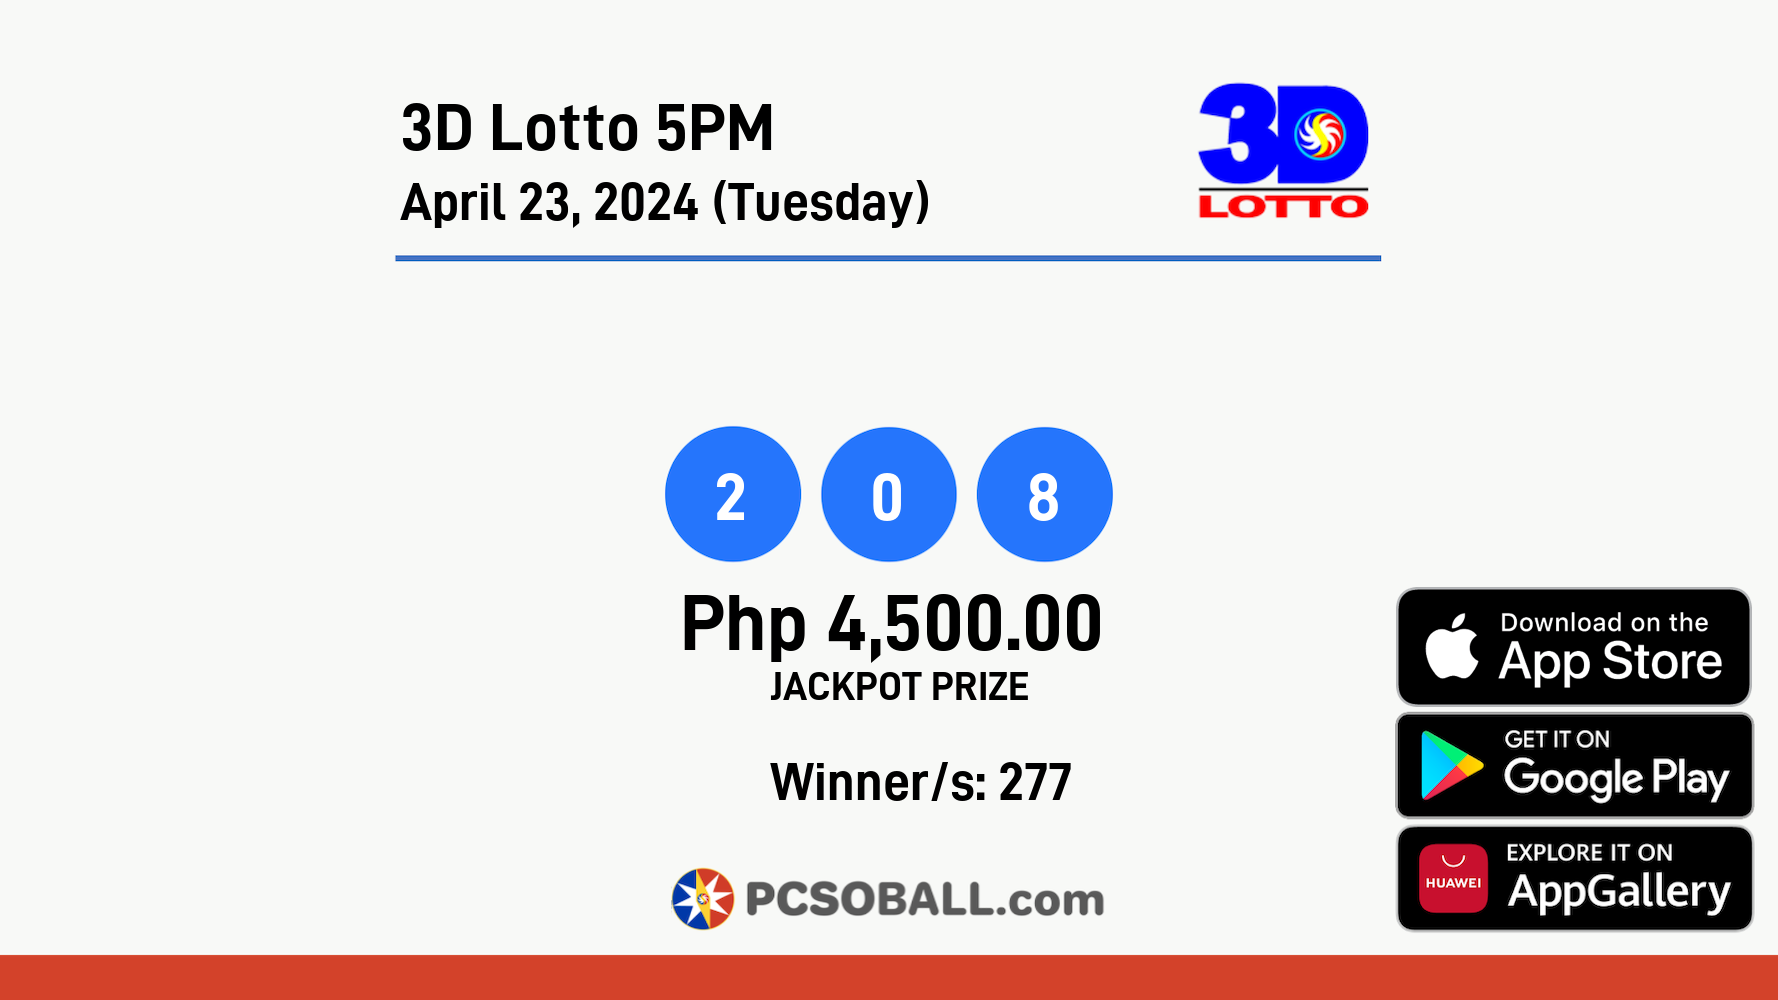 3D Lotto 5PM April 23, 2024 (Tuesday) Result